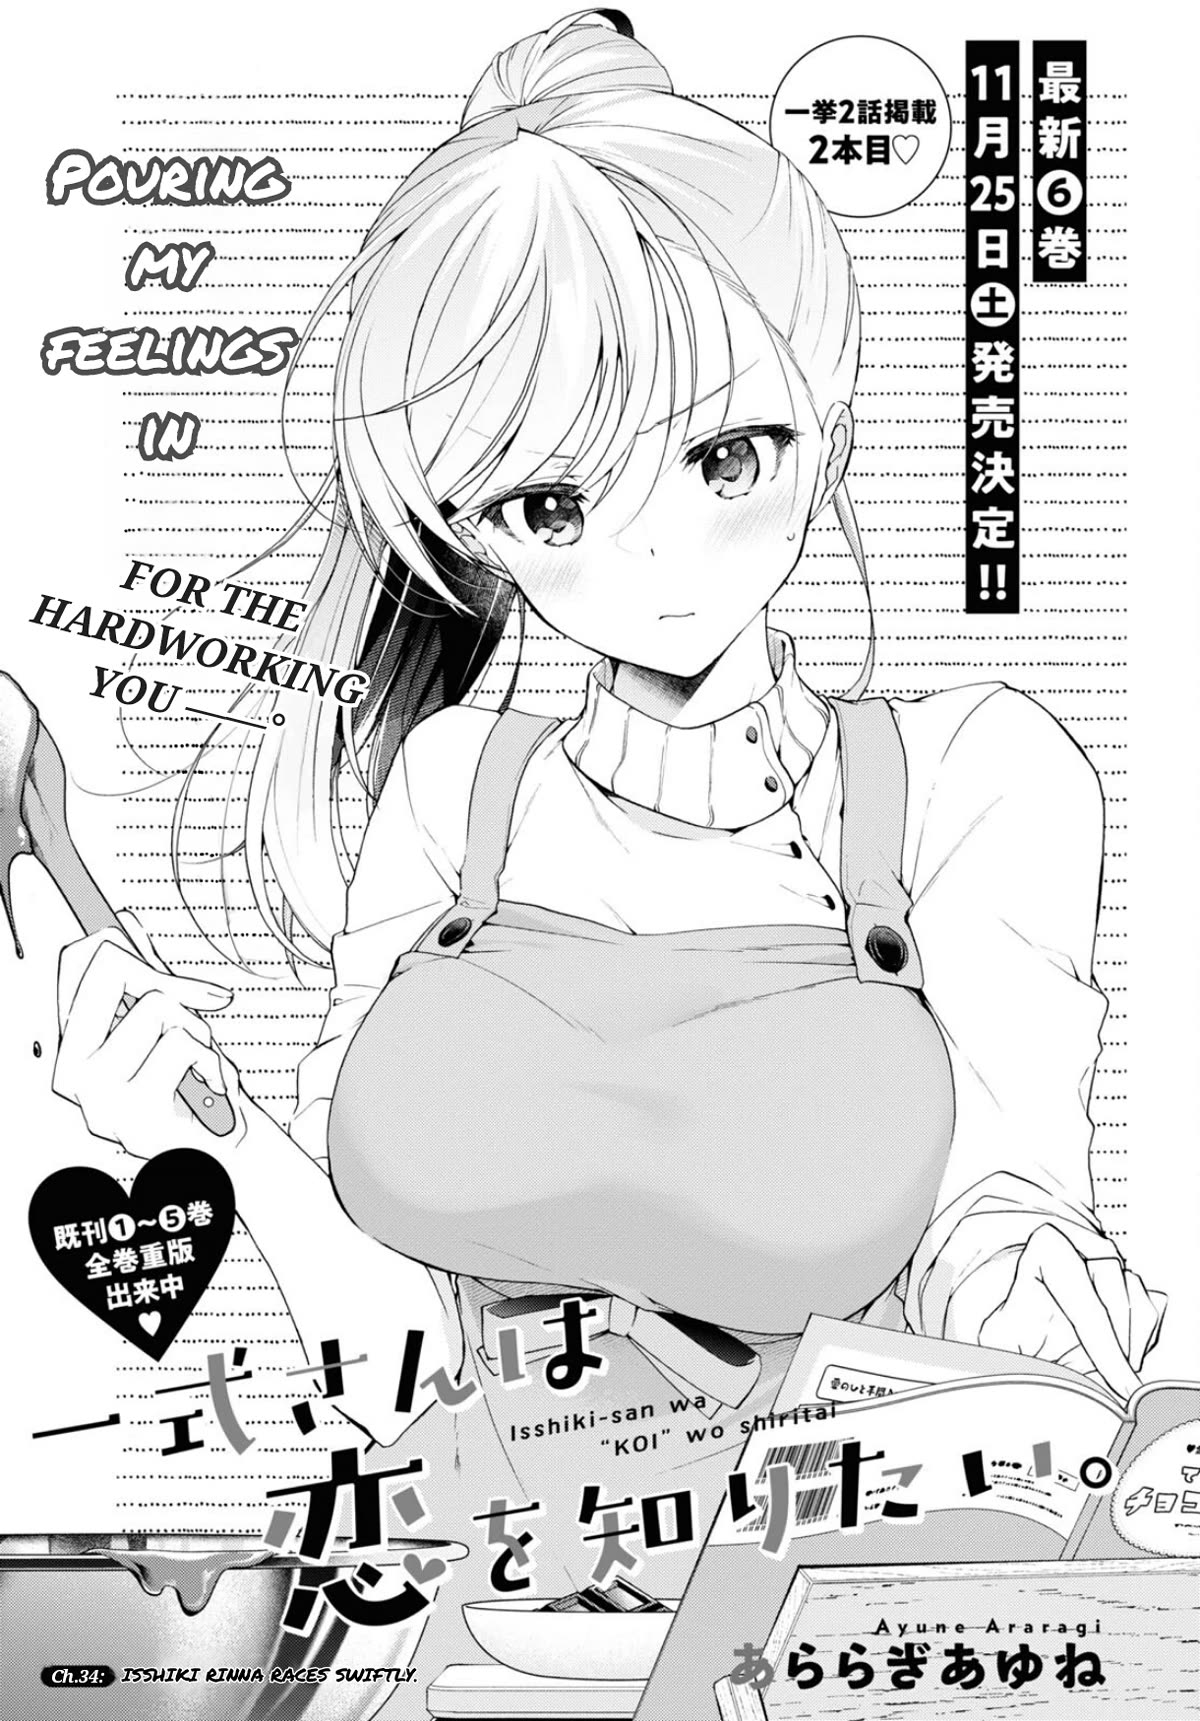 Isshiki-san Wants to Know About Love. - chapter 34 - #2